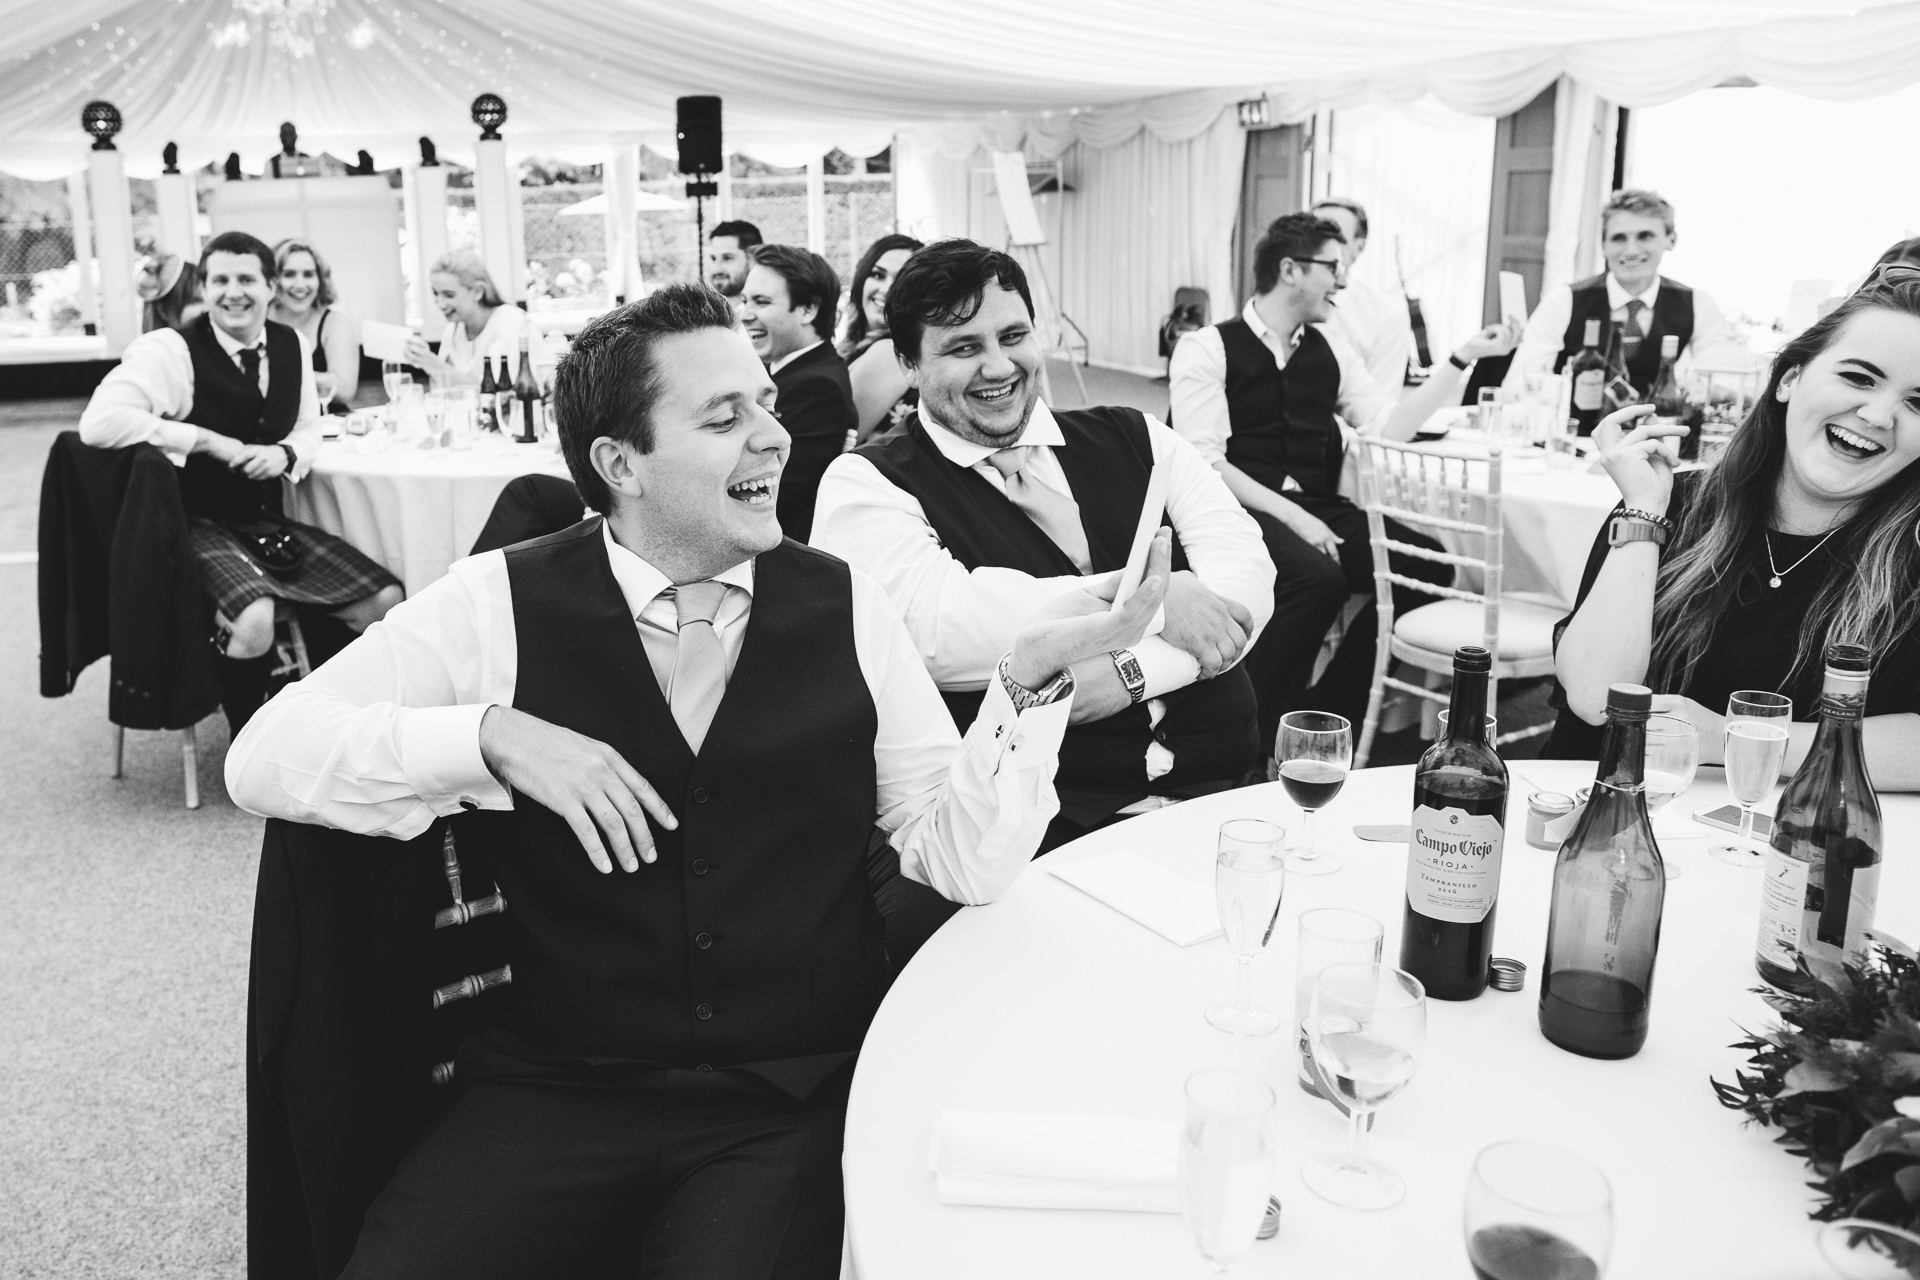 Guests laughing during wedding speeches